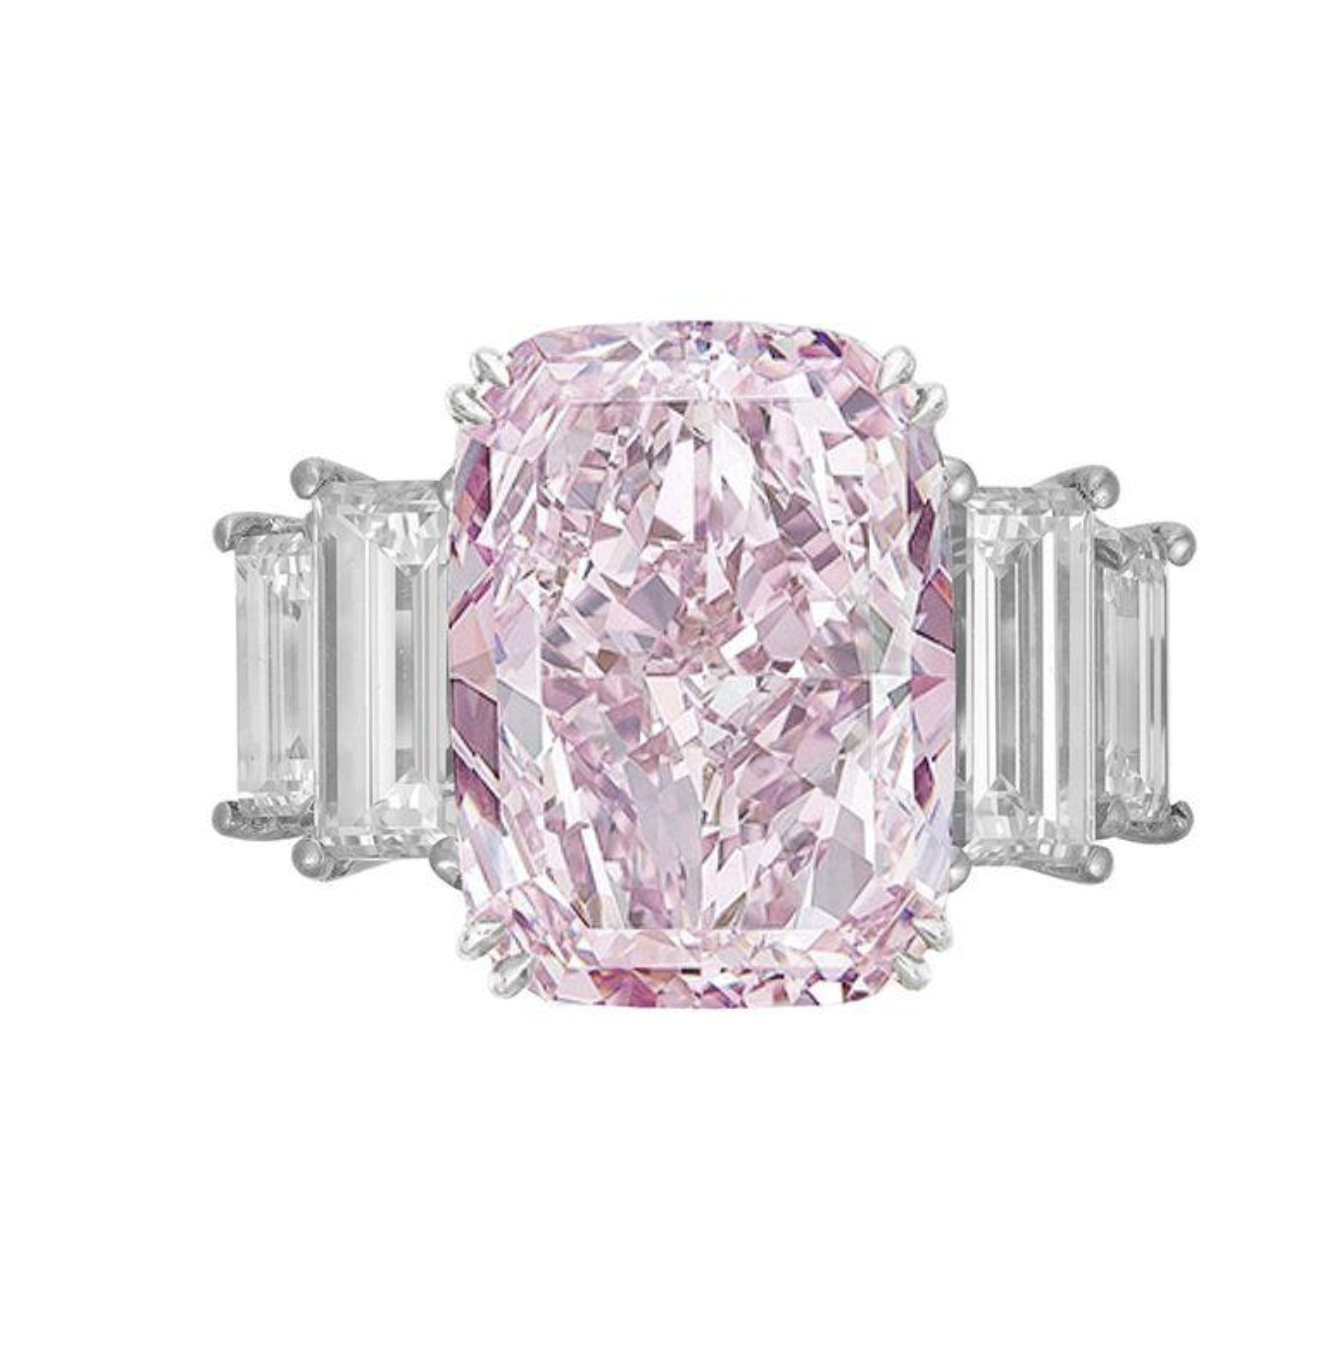 10-of-the-best-barbiecore-pieces-of-jewellery-7ct-even-fancy-pink-gia-diamond-ring-hardly-ever-worn-it-uk-resale-website